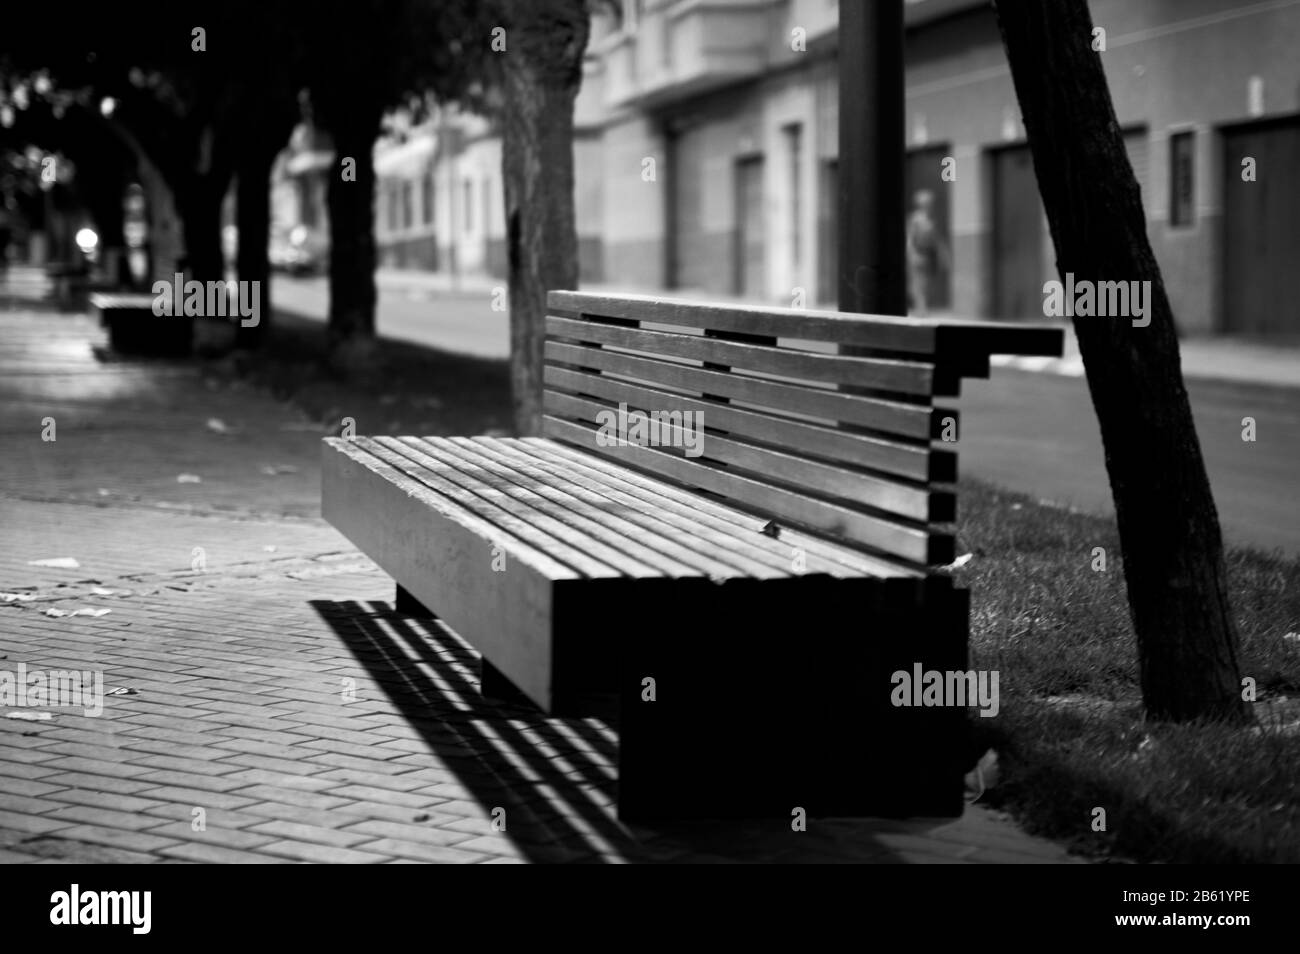 detail of a wooden bench on a walk in a street in winter in black and white Stock Photo